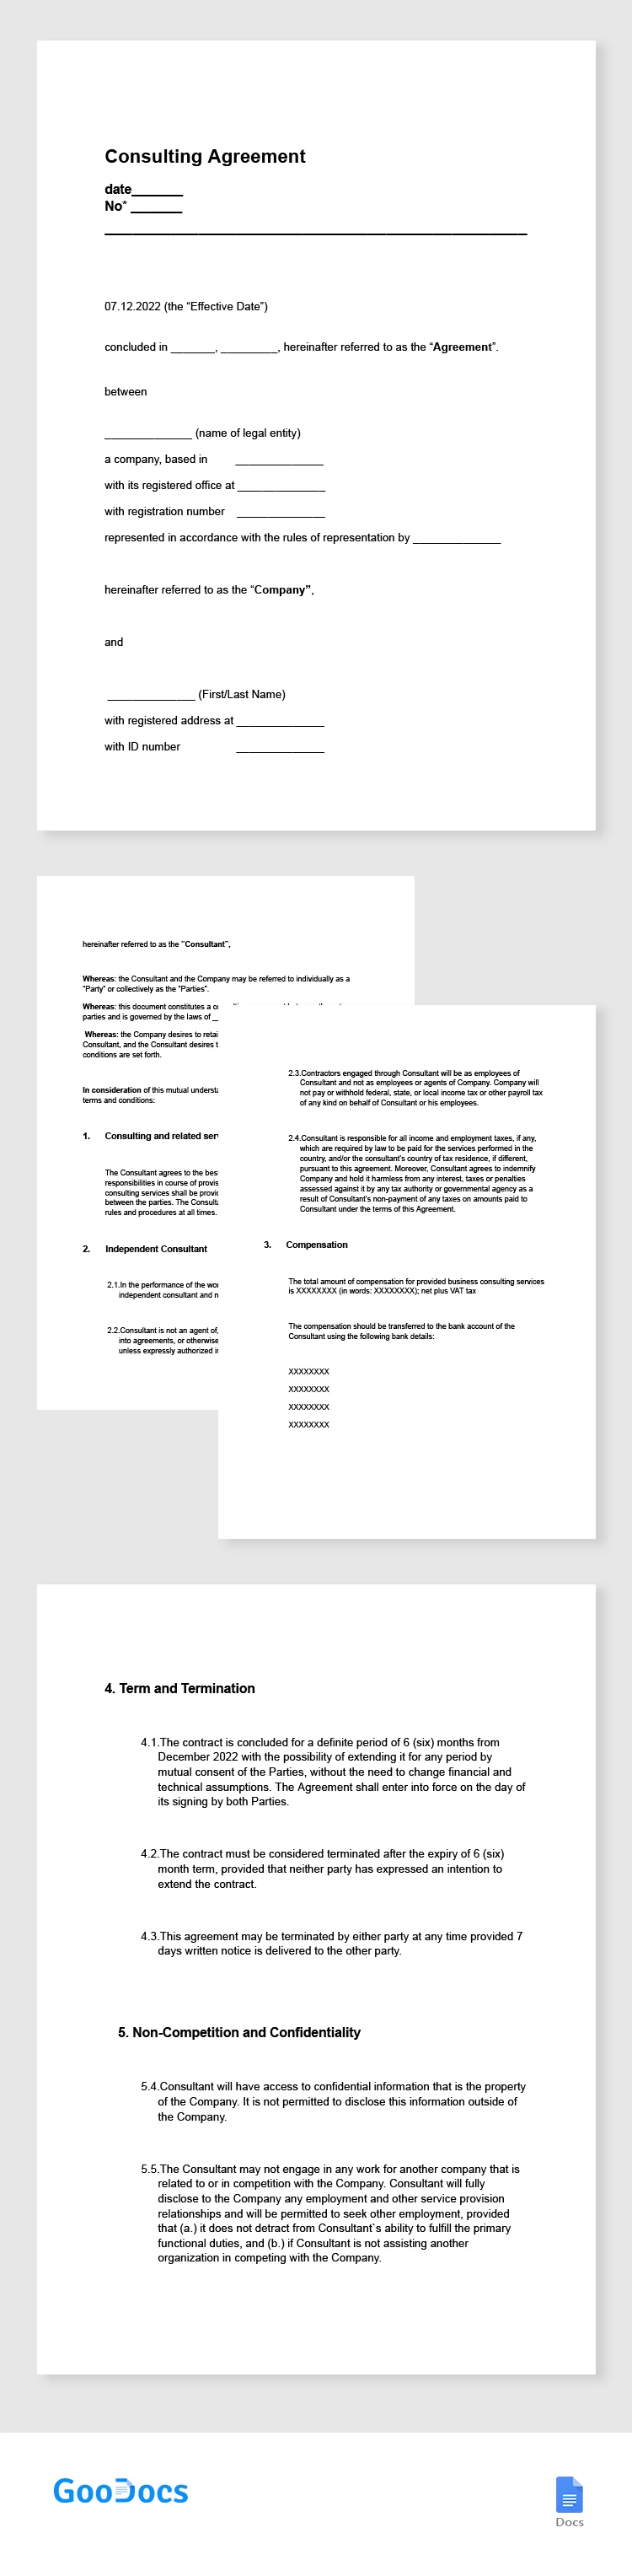 Consulting Agreement - free Google Docs Template - 10065365